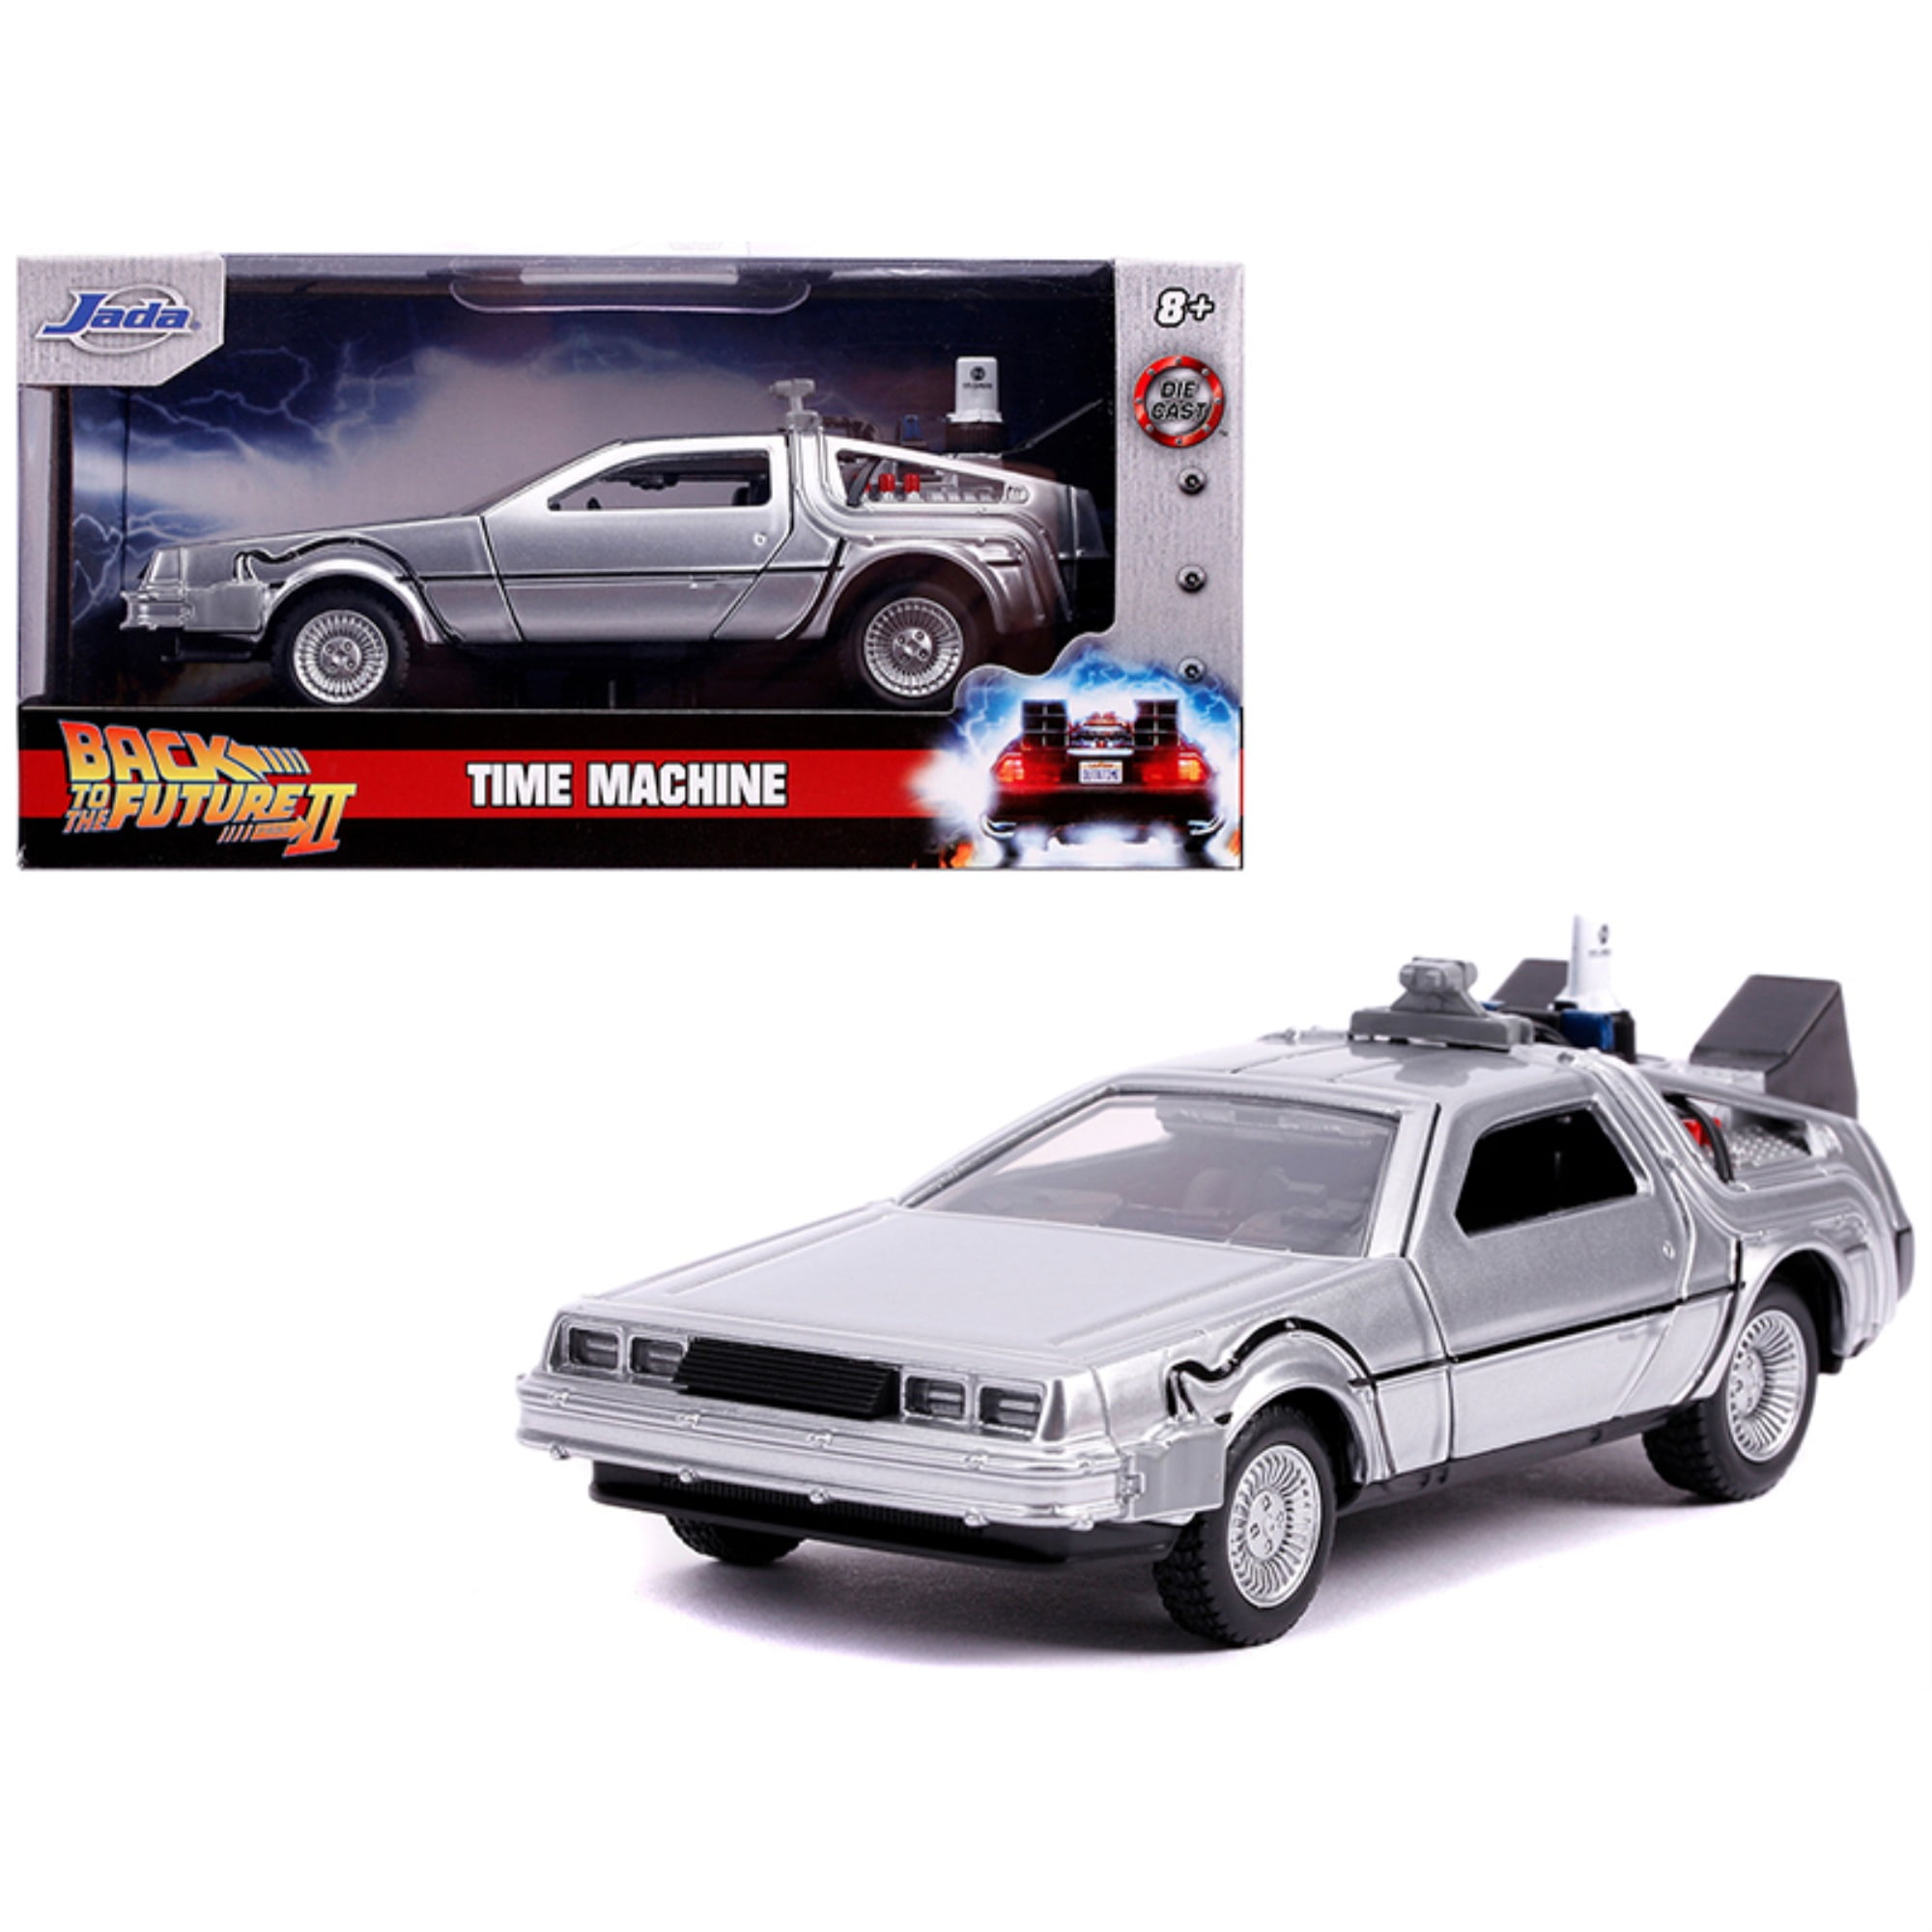 Back to The Future III DIECAST 1:24 W/B DMC Delorean TIME Machine 22444W by WELLY